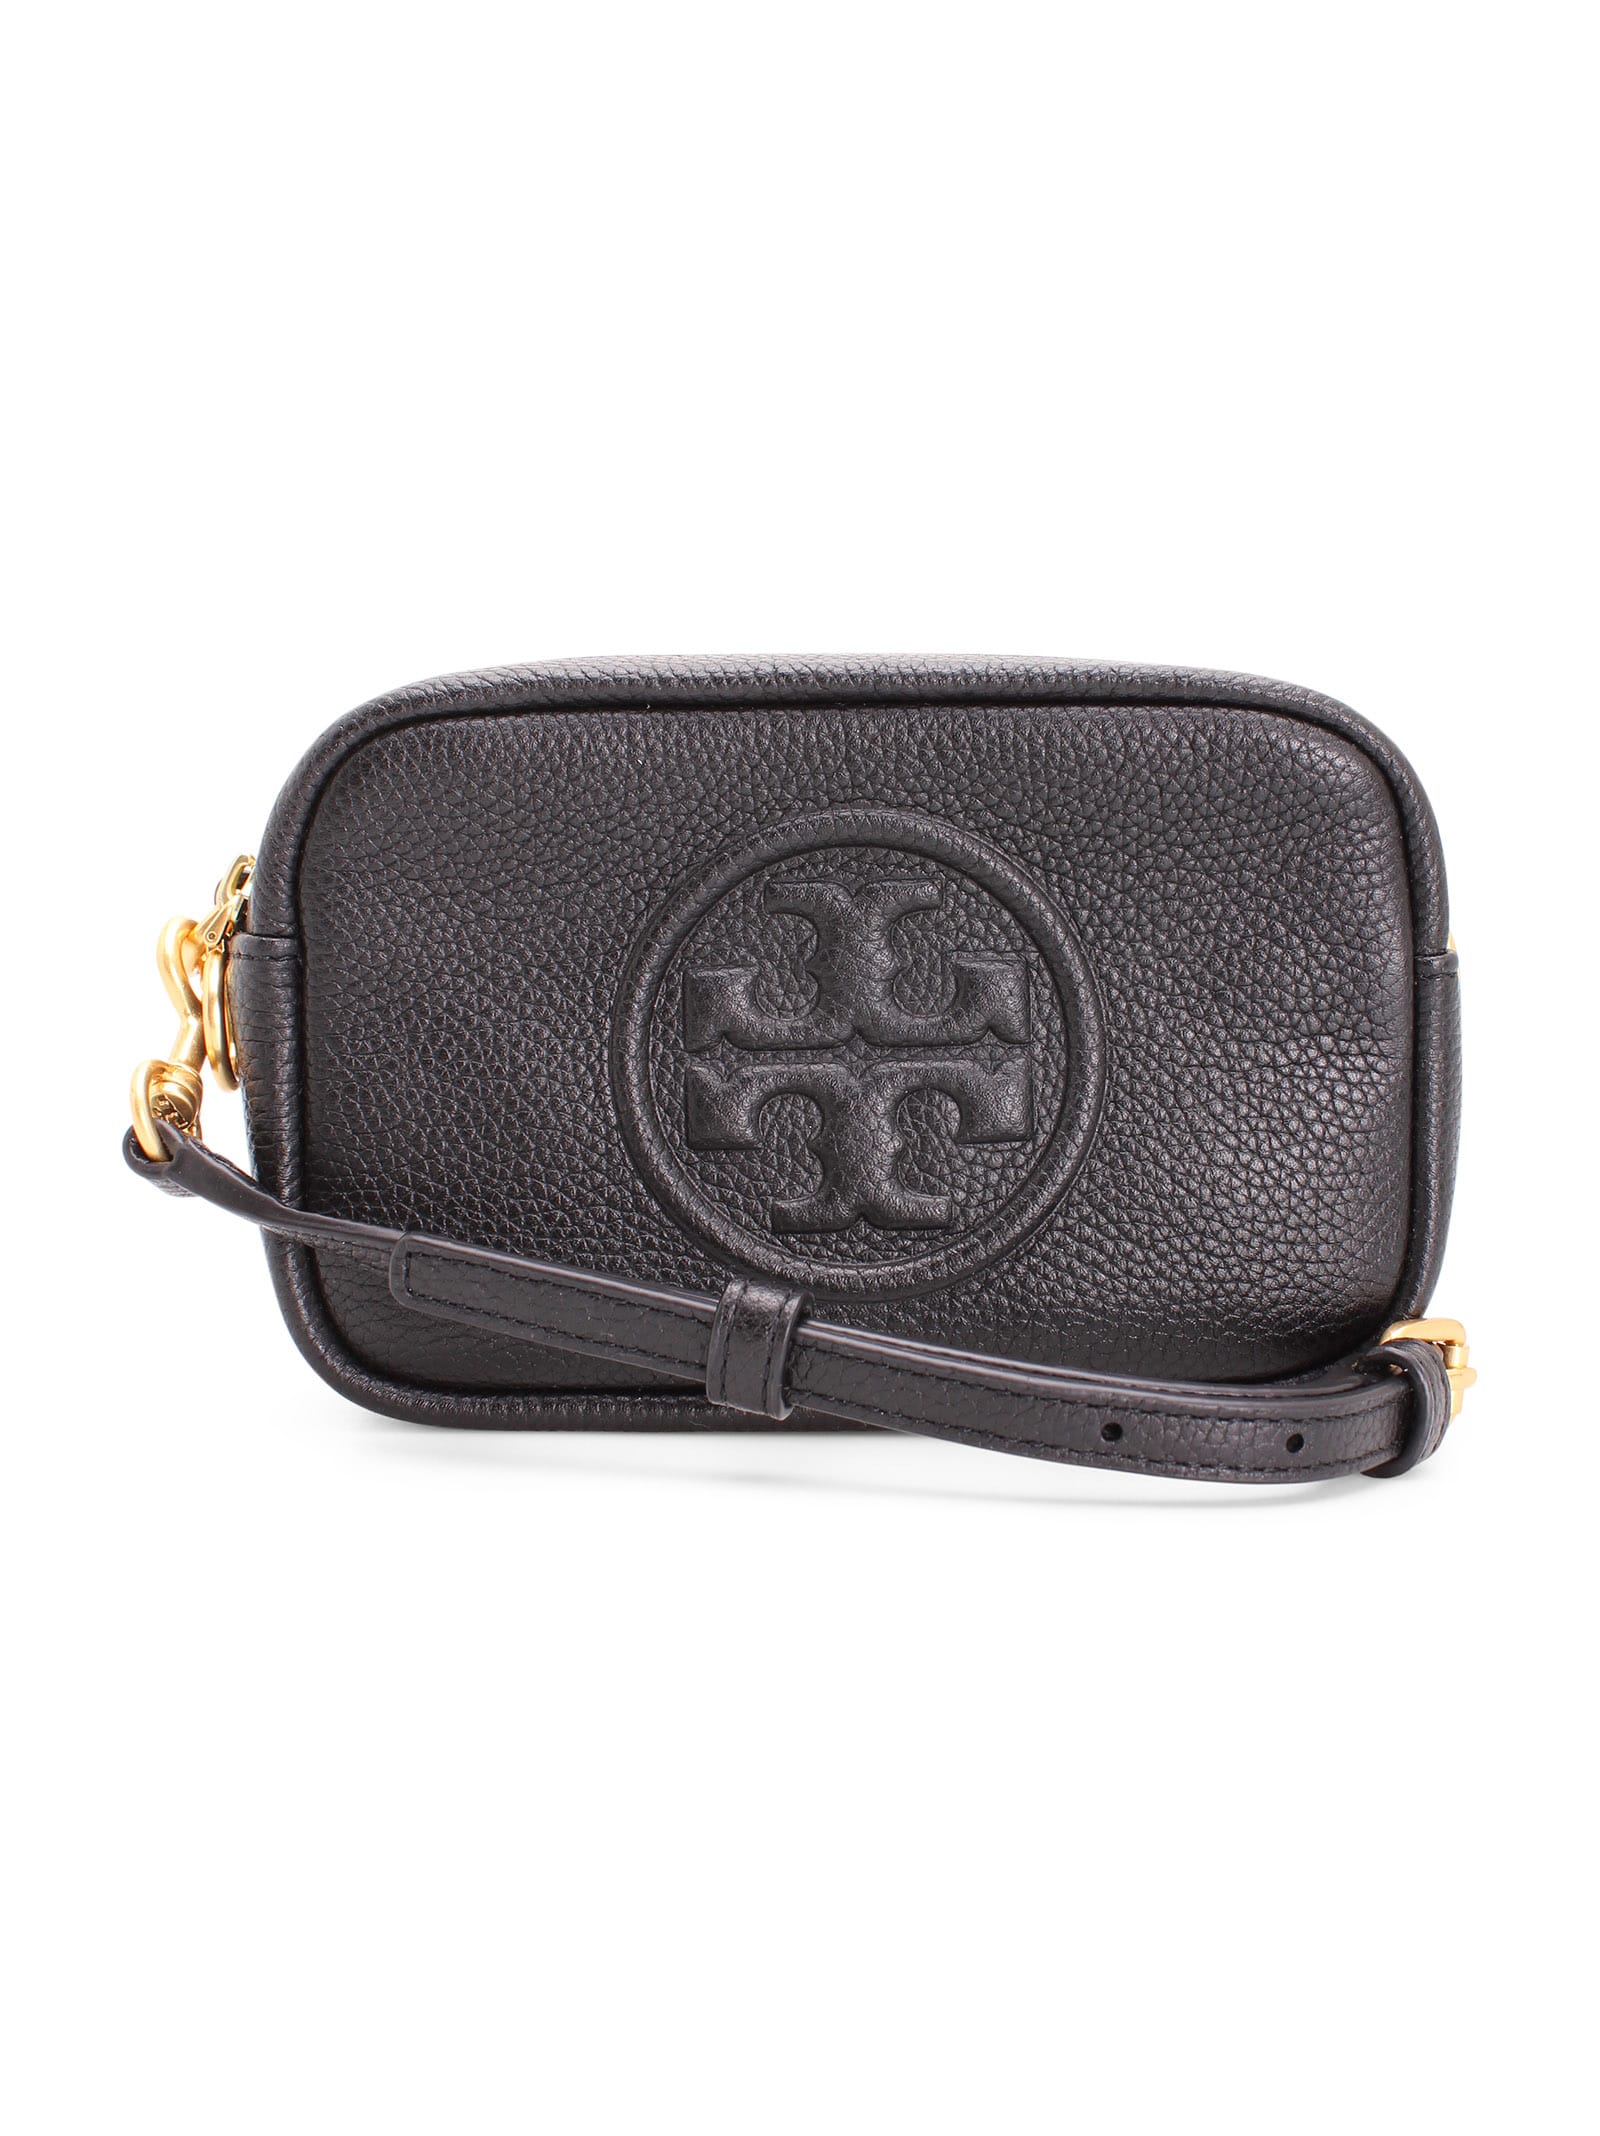 Tory Burch perry Bombe Leather Shoulder Bag